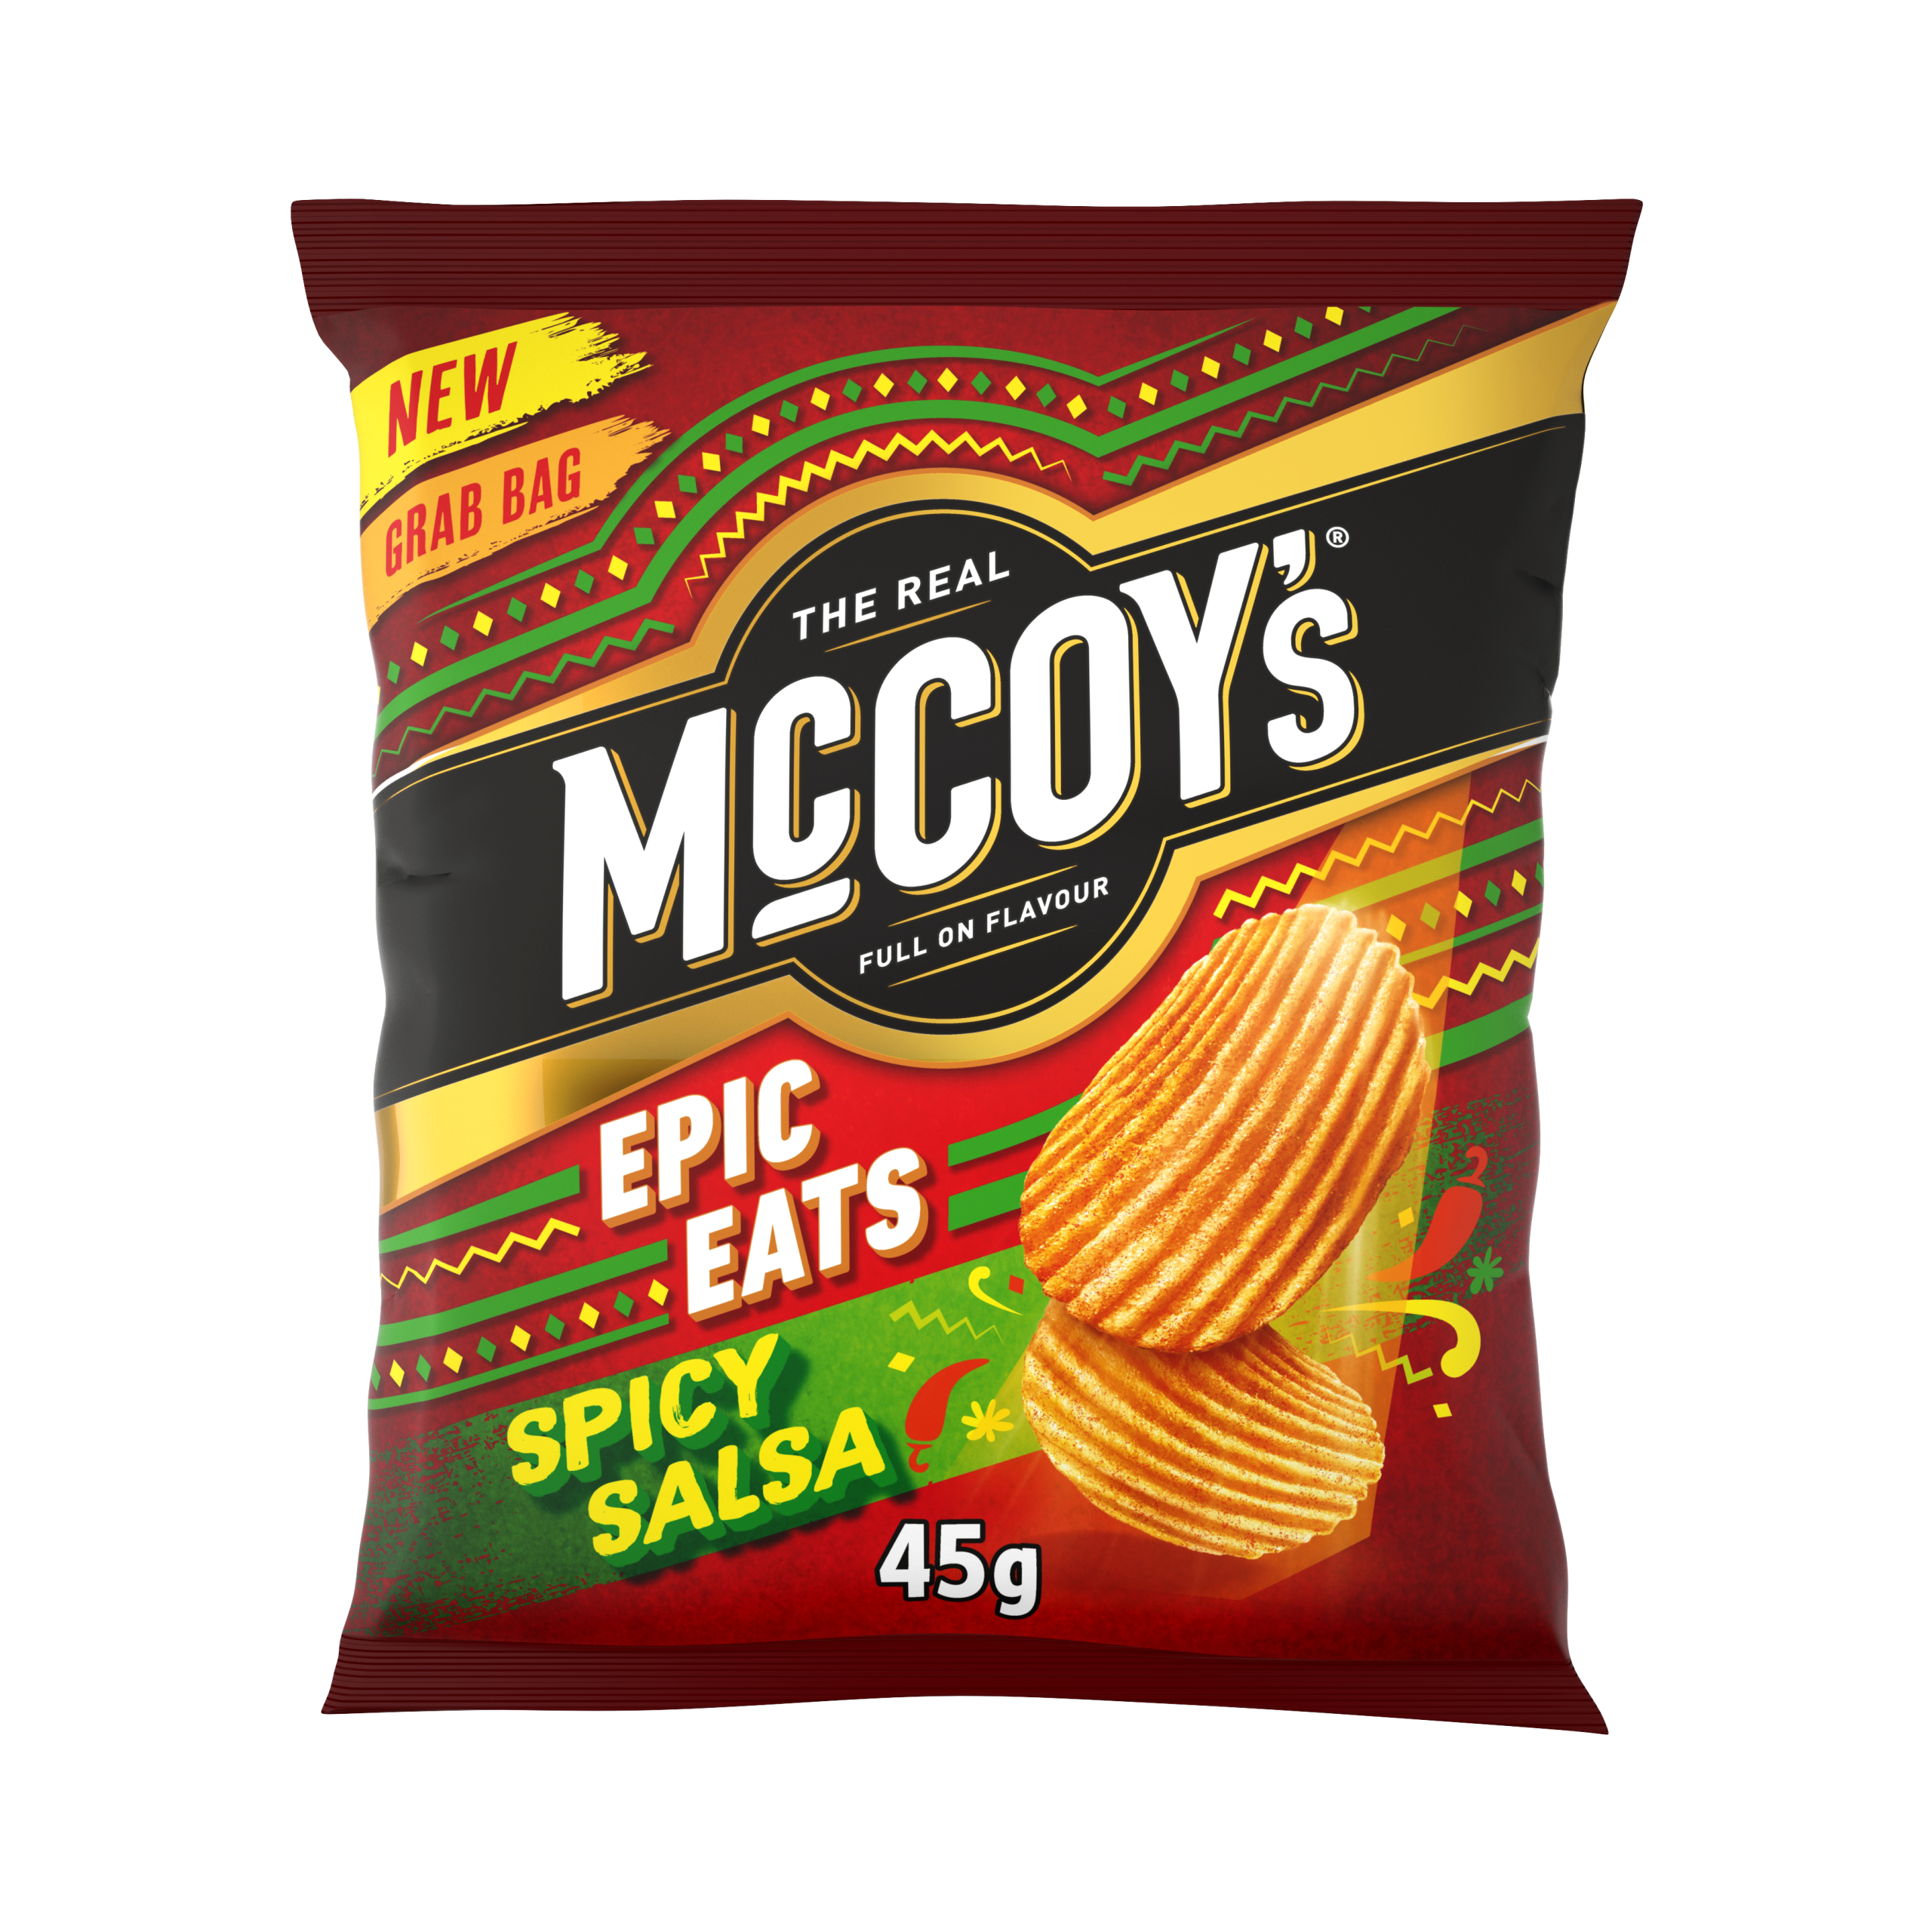 New McCoy’s launch: Epic Eats available in Nacho Cheese and Spicy Salsa